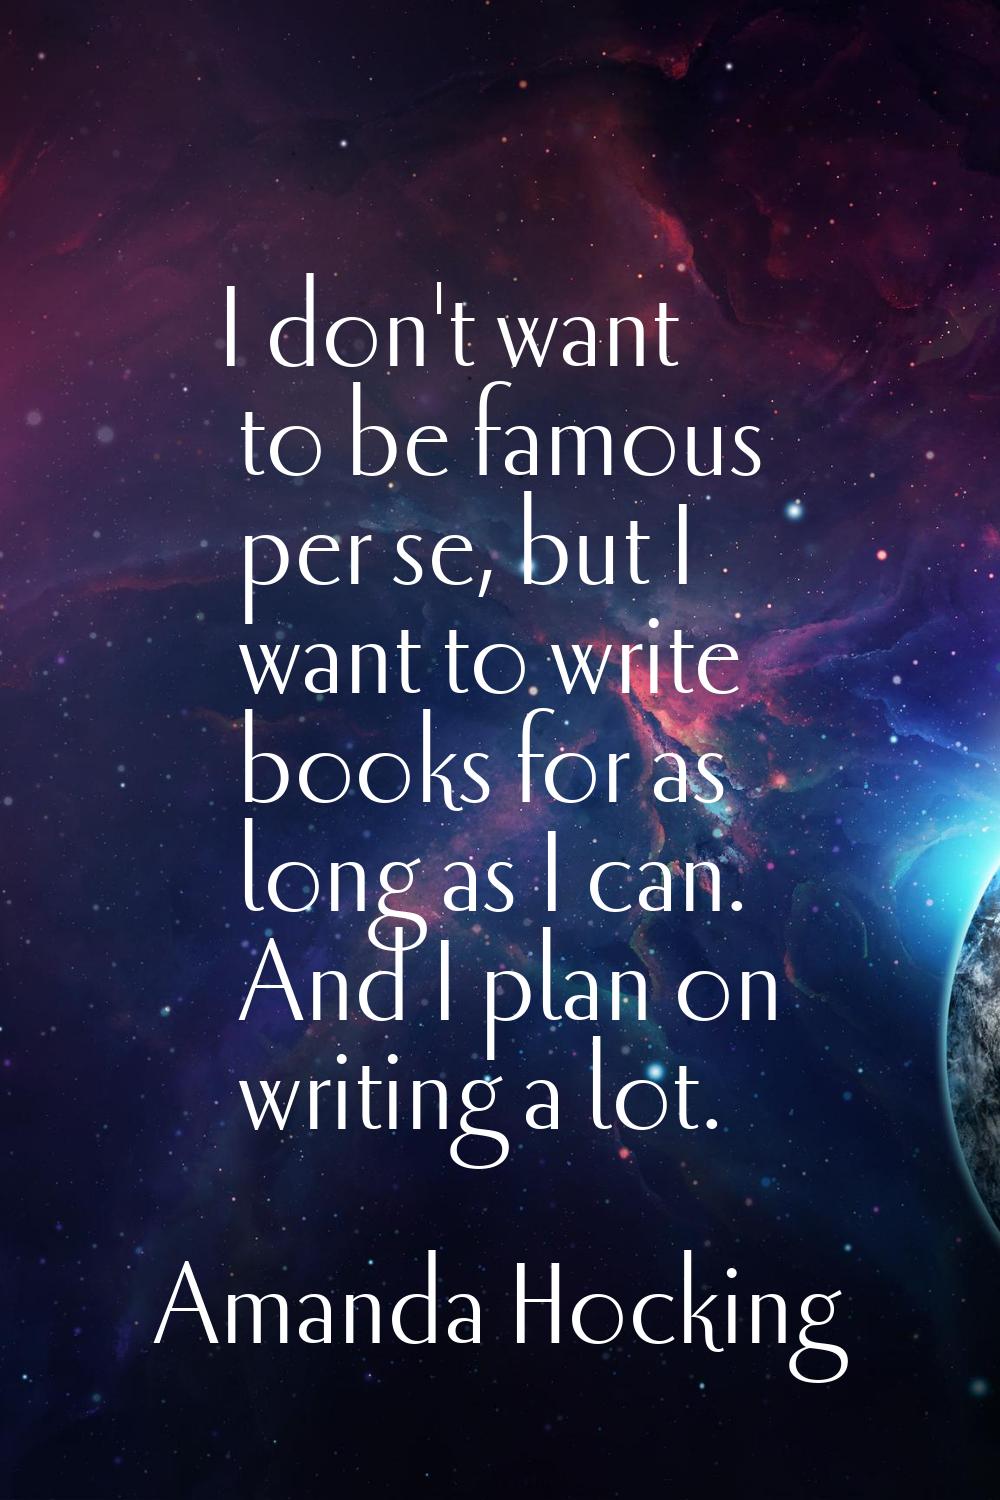 I don't want to be famous per se, but I want to write books for as long as I can. And I plan on wri